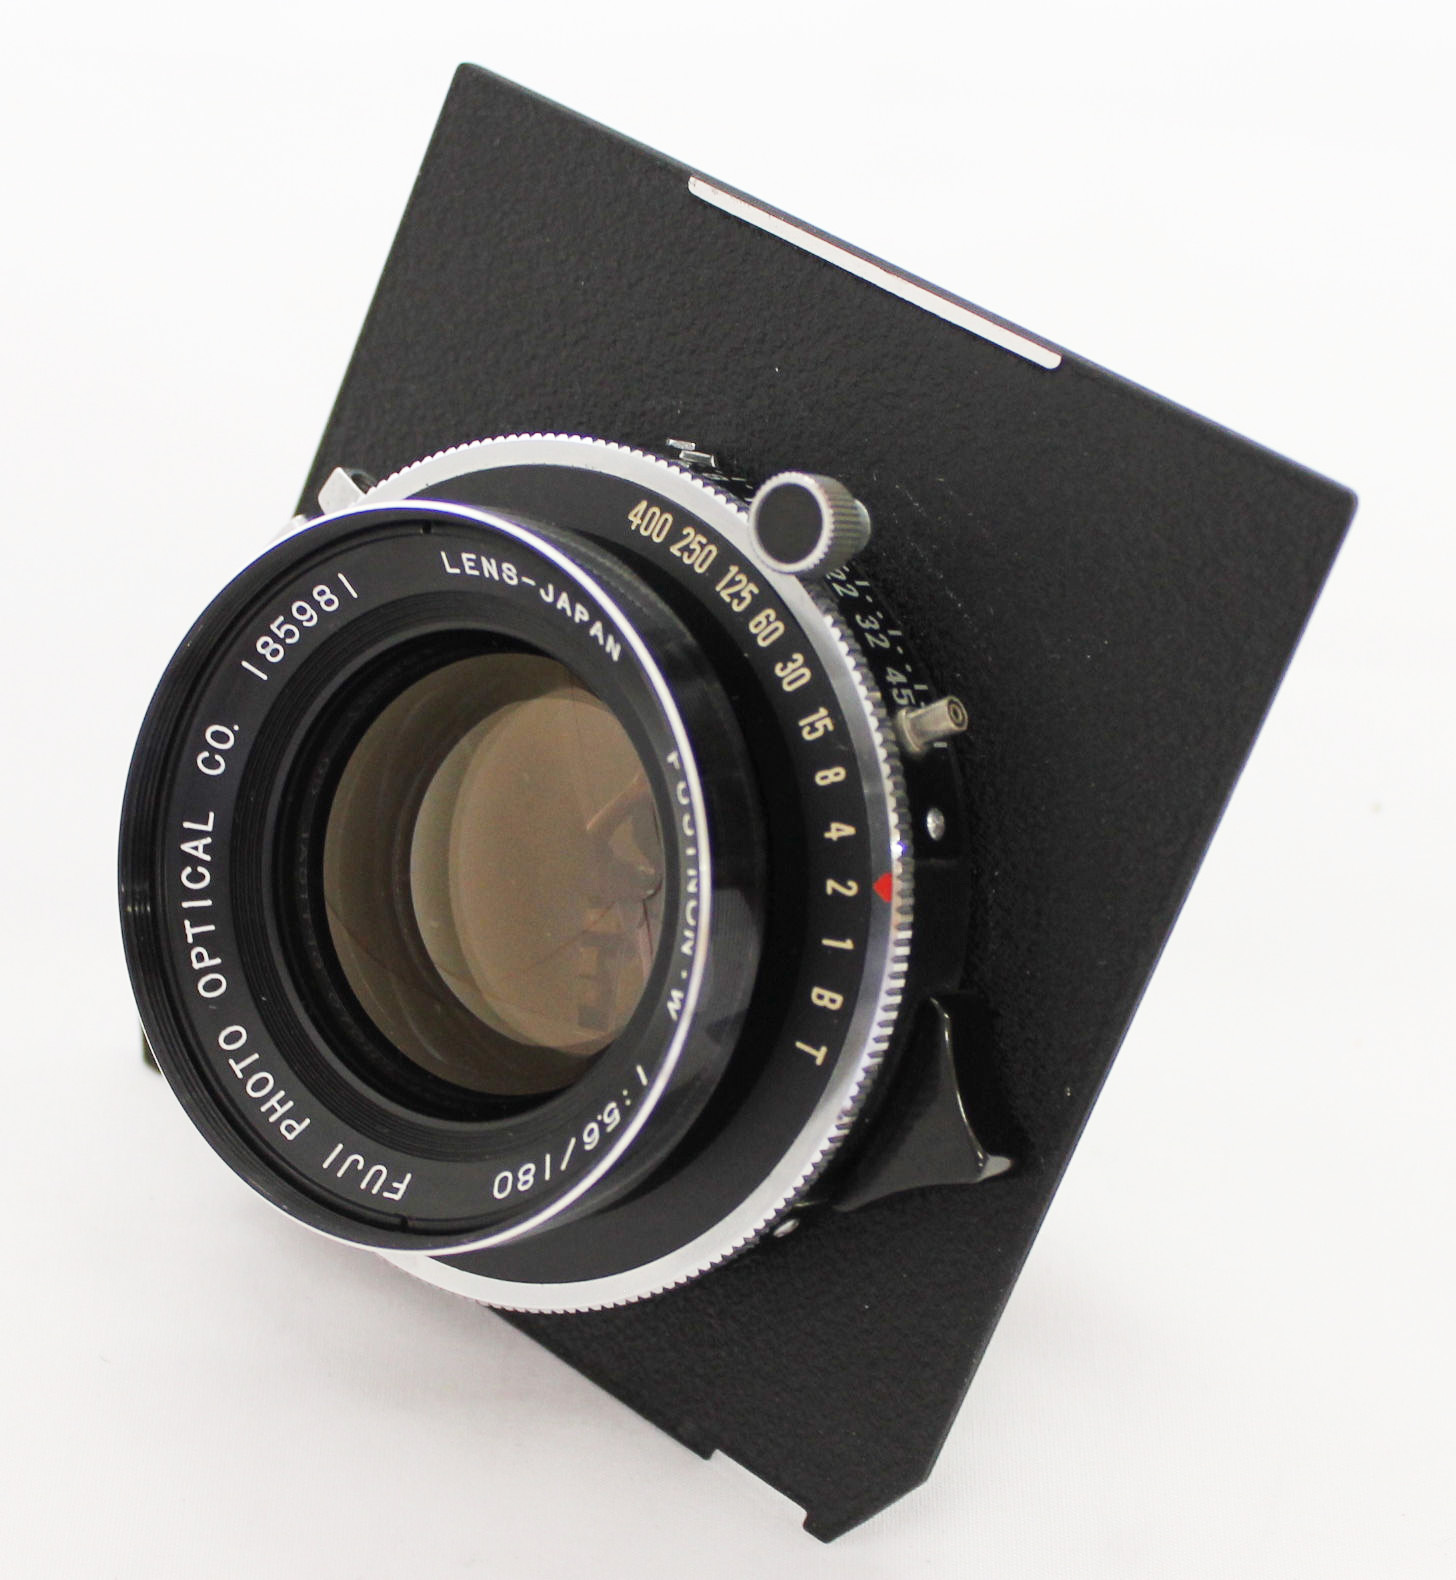 Japan Used Camera Shop | [Excellent++++] Fuji Fujinon W 180mm F/5.6 Large Format Lens with Copal Shutter from Japan